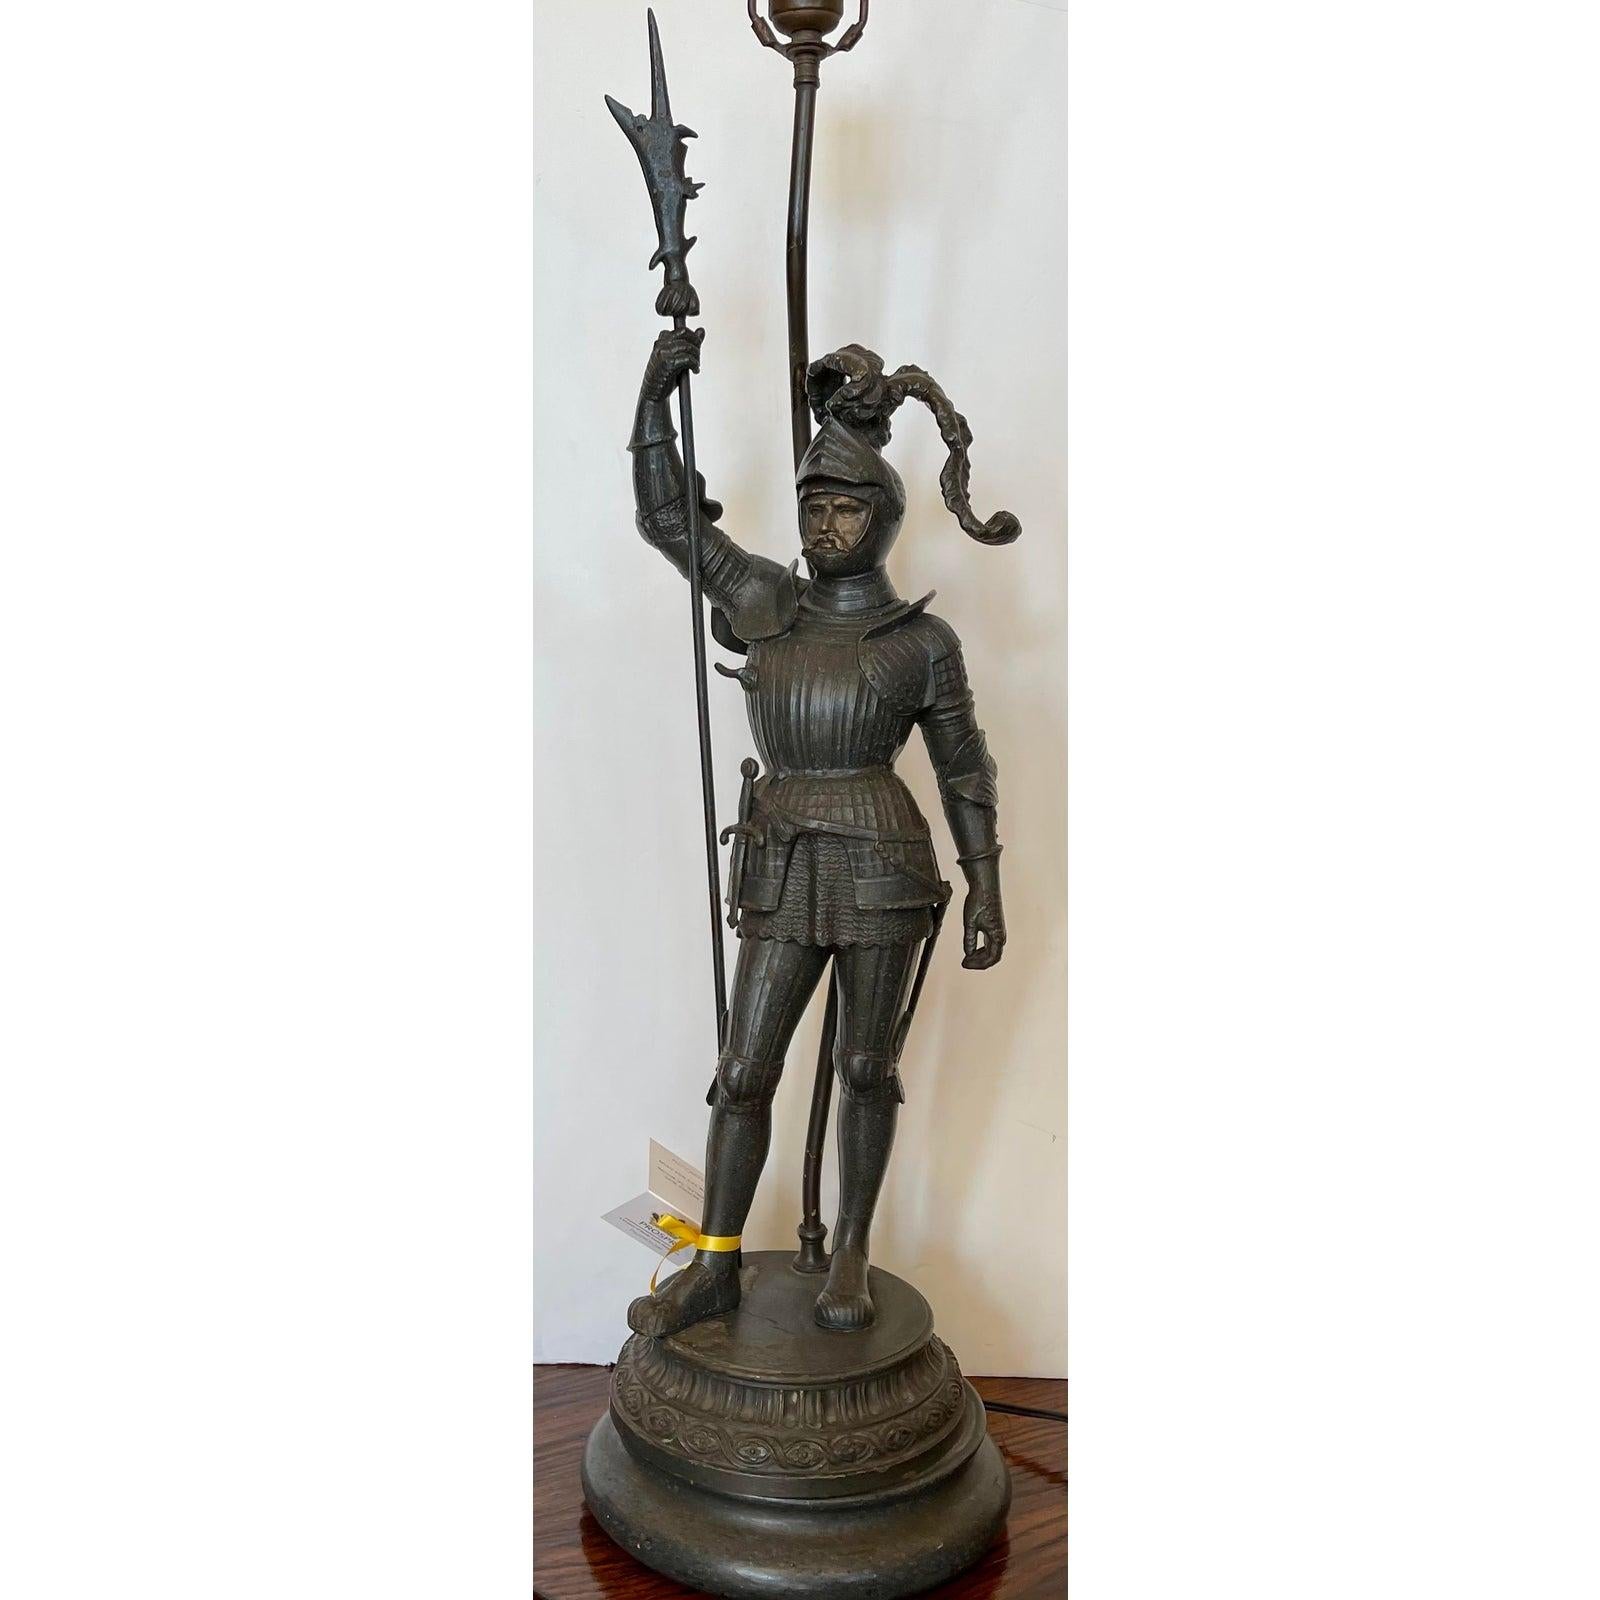 Antique Knight in Armor Figural Table Lamp

Additional information:
Materials: Lights, Metal
Color: Black
Period: Early 20th Century
Styles: Figurative, French
Lamp Shade: Not Included
Item Type: Vintage, Antique or Pre-owned
Dimensions: 7ʺW × 6ʺD ×